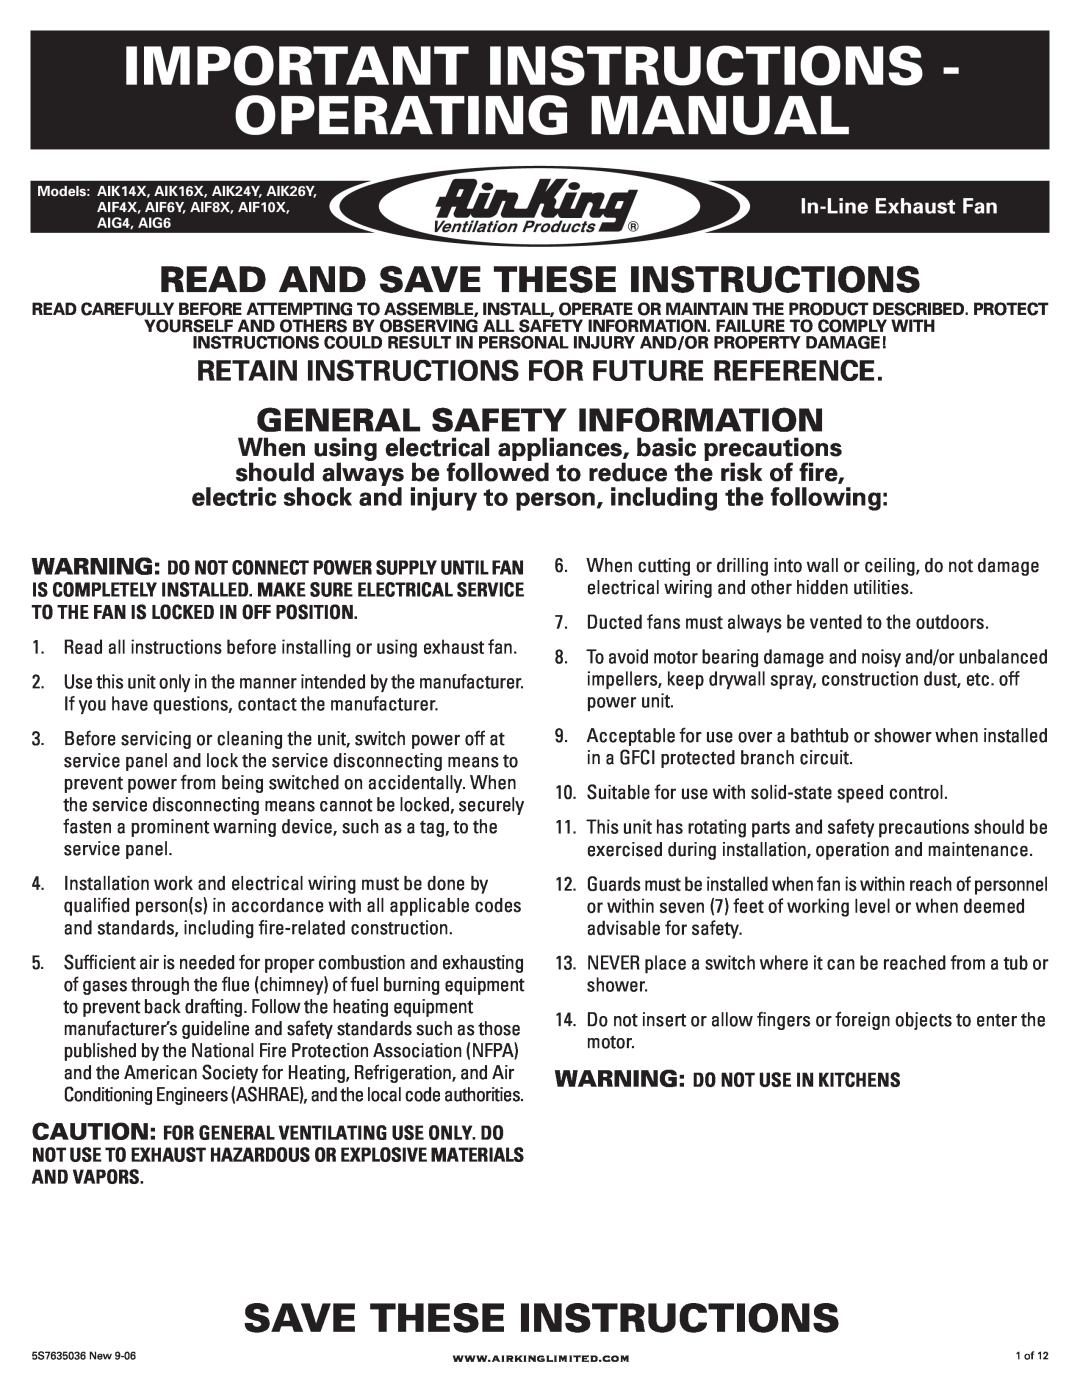 Air King AIK16X manual Important Instructions Operating Manual, Read And Save These Instructions, In-Line Exhaust Fan 